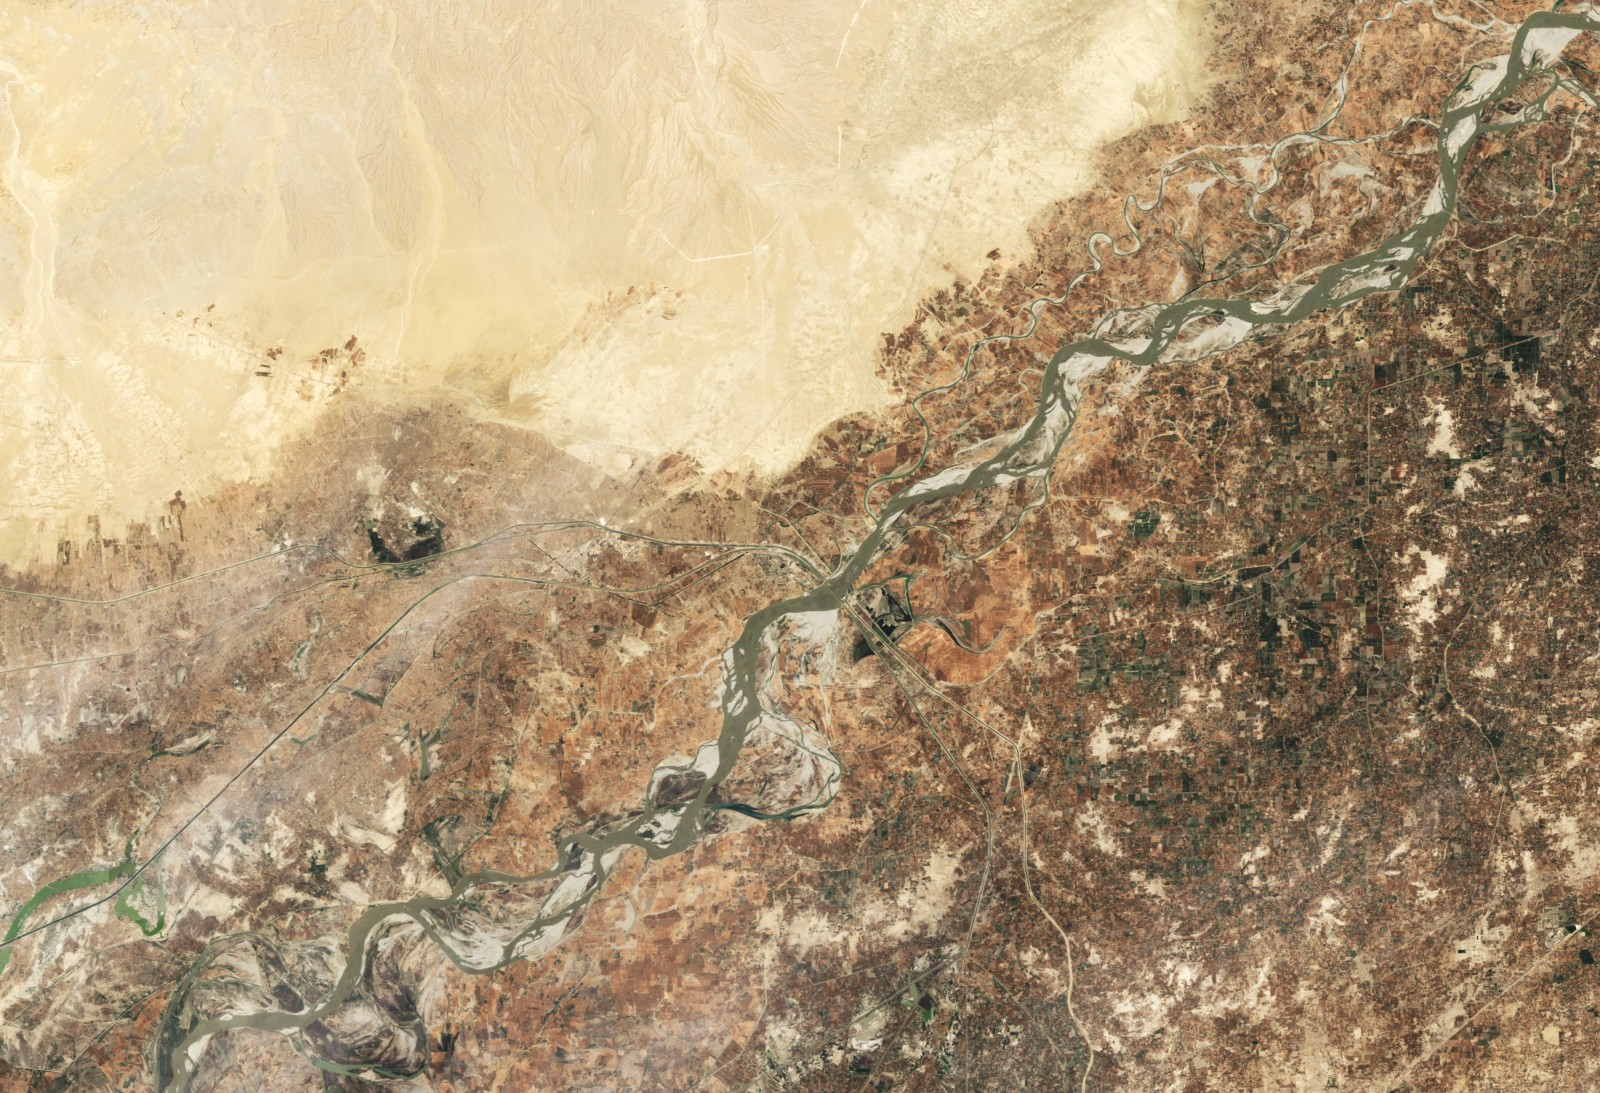 The Indus River is critical for agriculture and energy production in India and Pakistan. The shared river basin is home to at least 300 million people, and its water resources have long been a point of contention between the two countries. This image, captured by the Landsat 5 satellite in June 2009, shows the area around the Guddu Barrage, just south of the border between Punjab and Sindh provinces in Pakistan. Image courtesy NASA